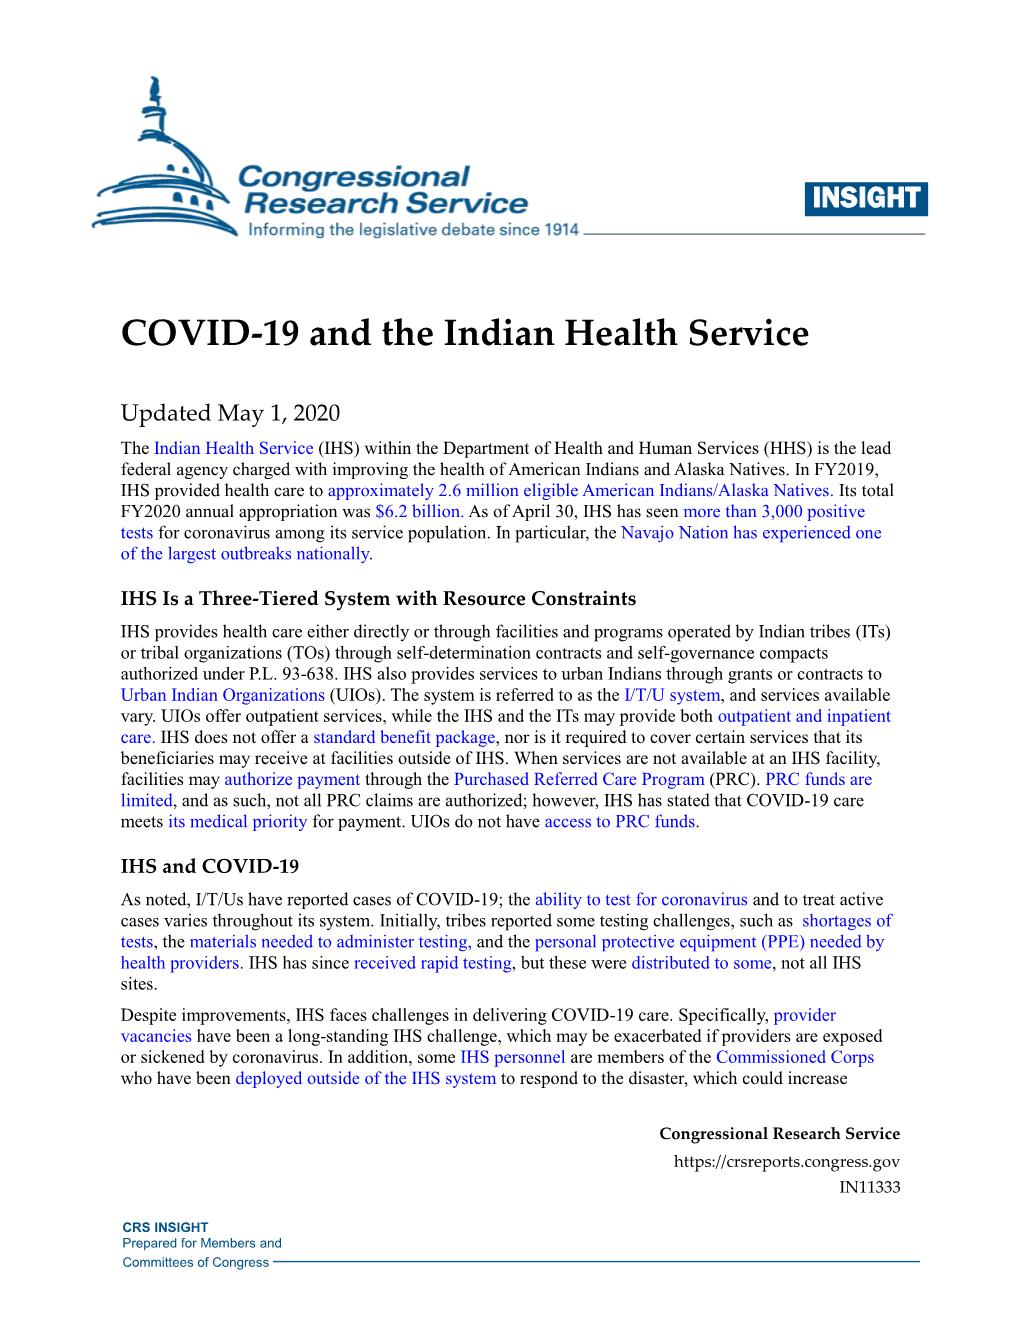 COVID-19 and the Indian Health Service